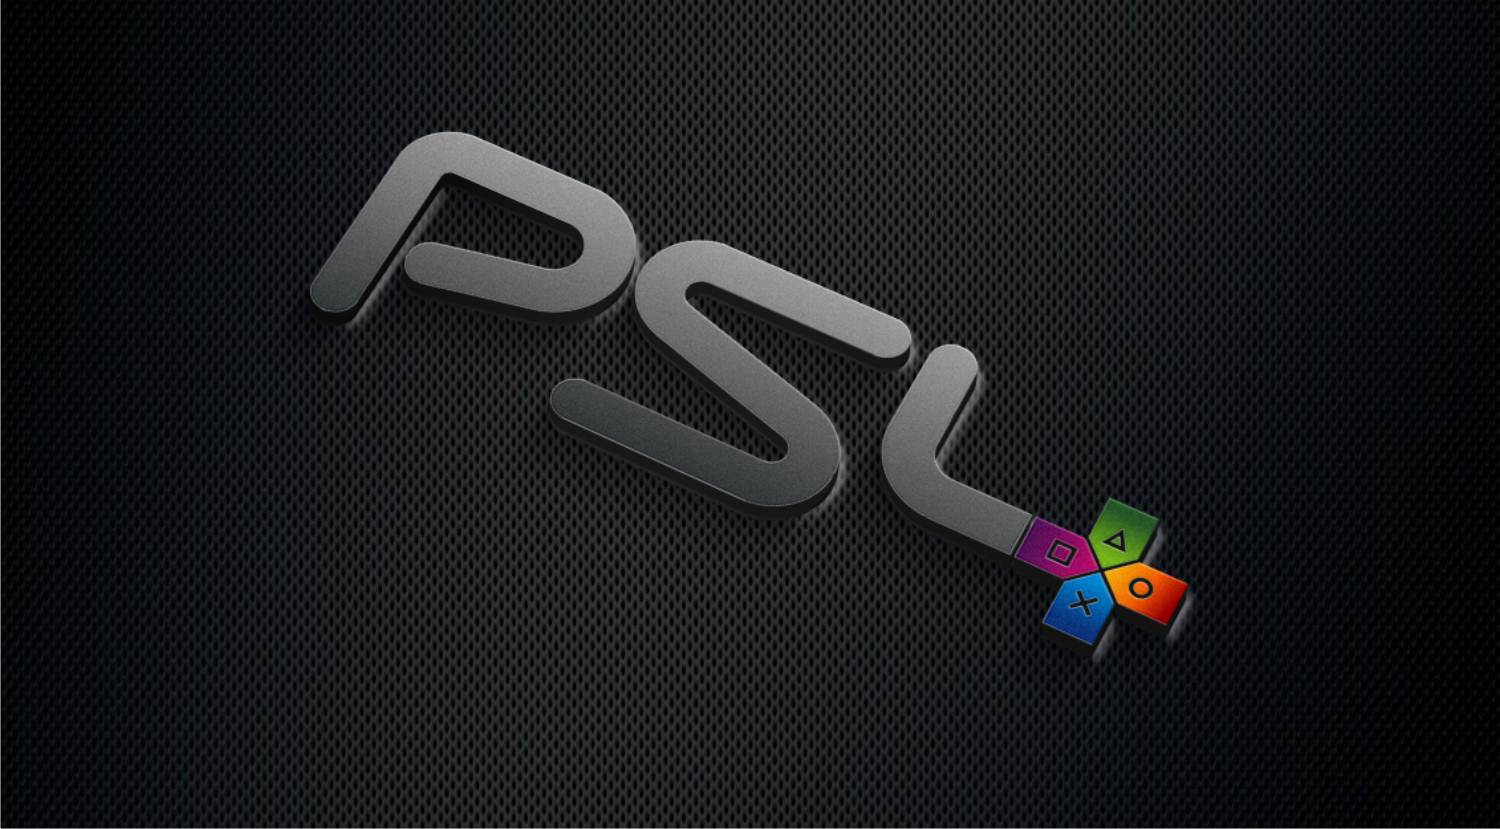 Sony PlayStation 4 Logo - Amazing PS4 Logo Concepts That Sony Could Draw Inspiration From